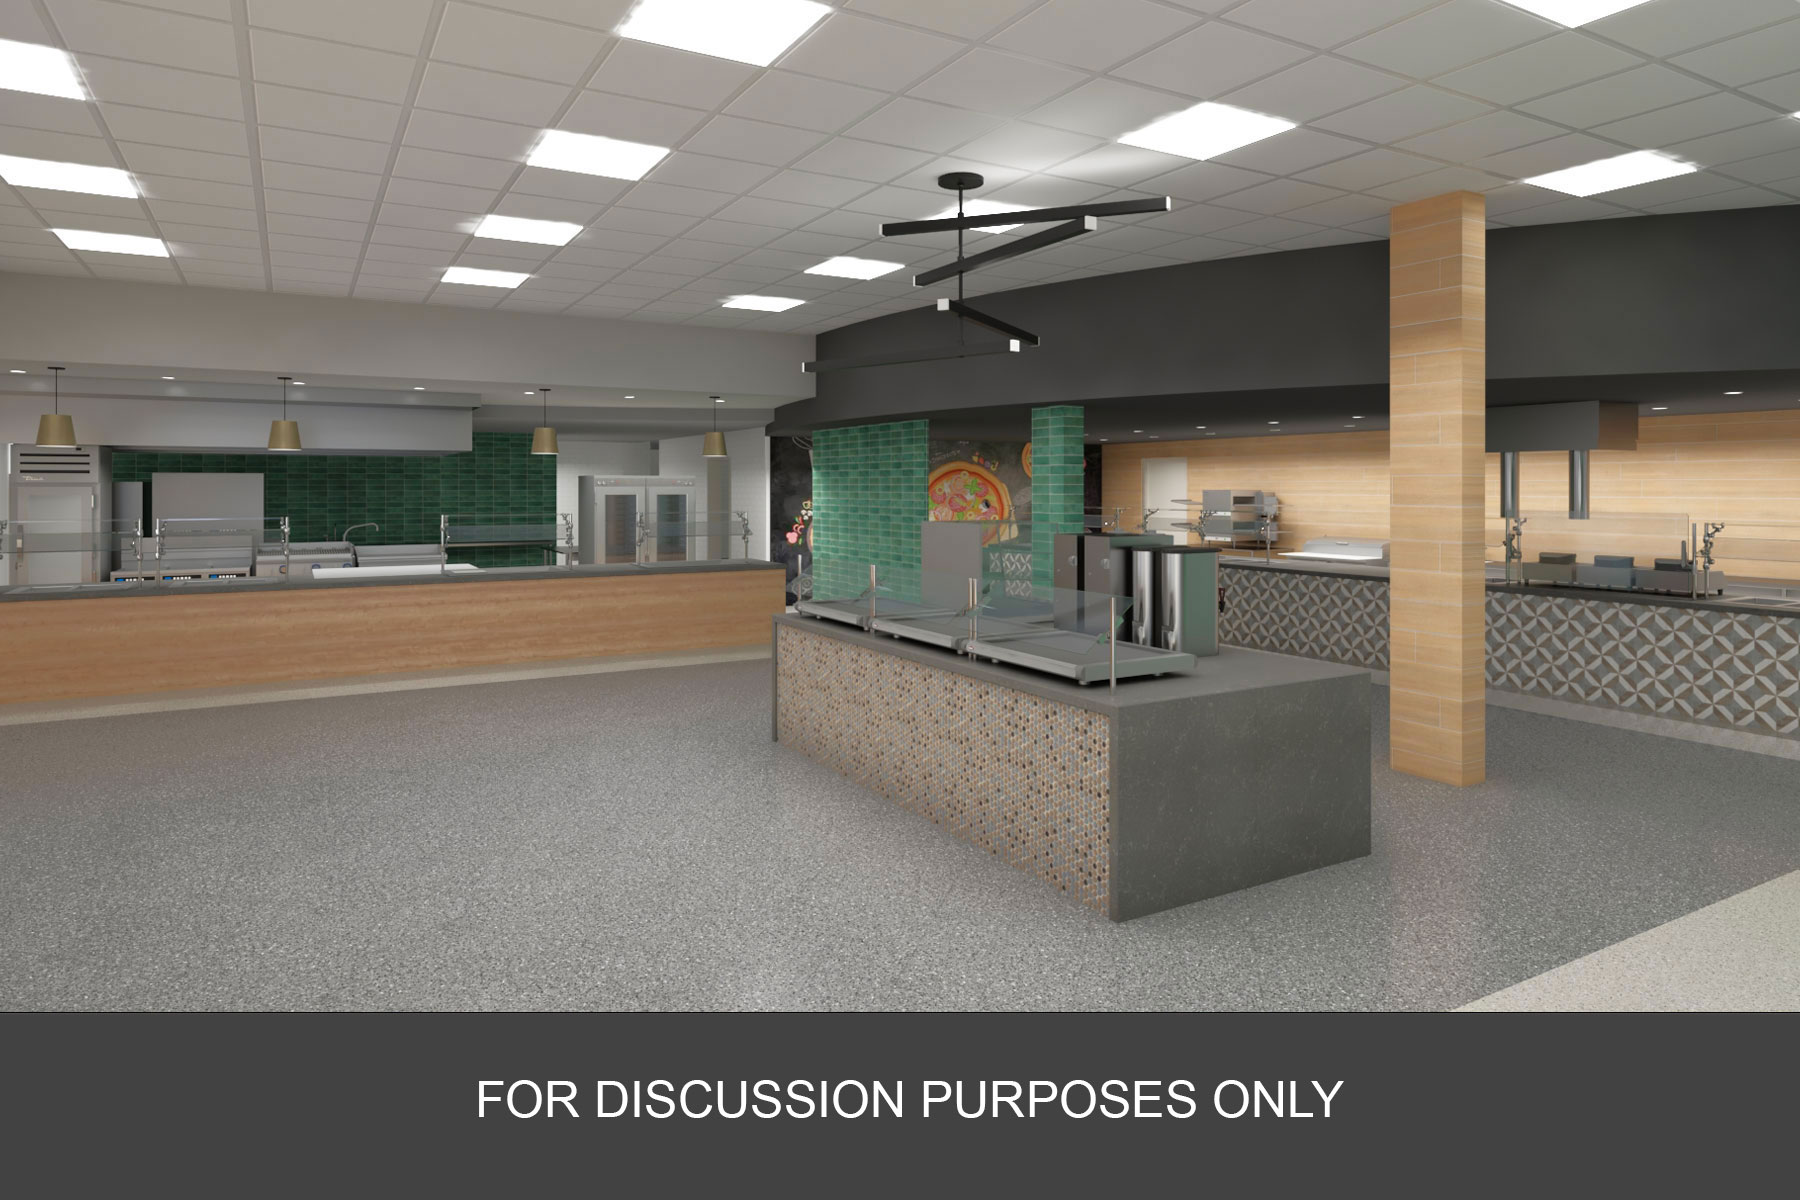 Conceptual rendering of renovated servery area in App State’s Park Place